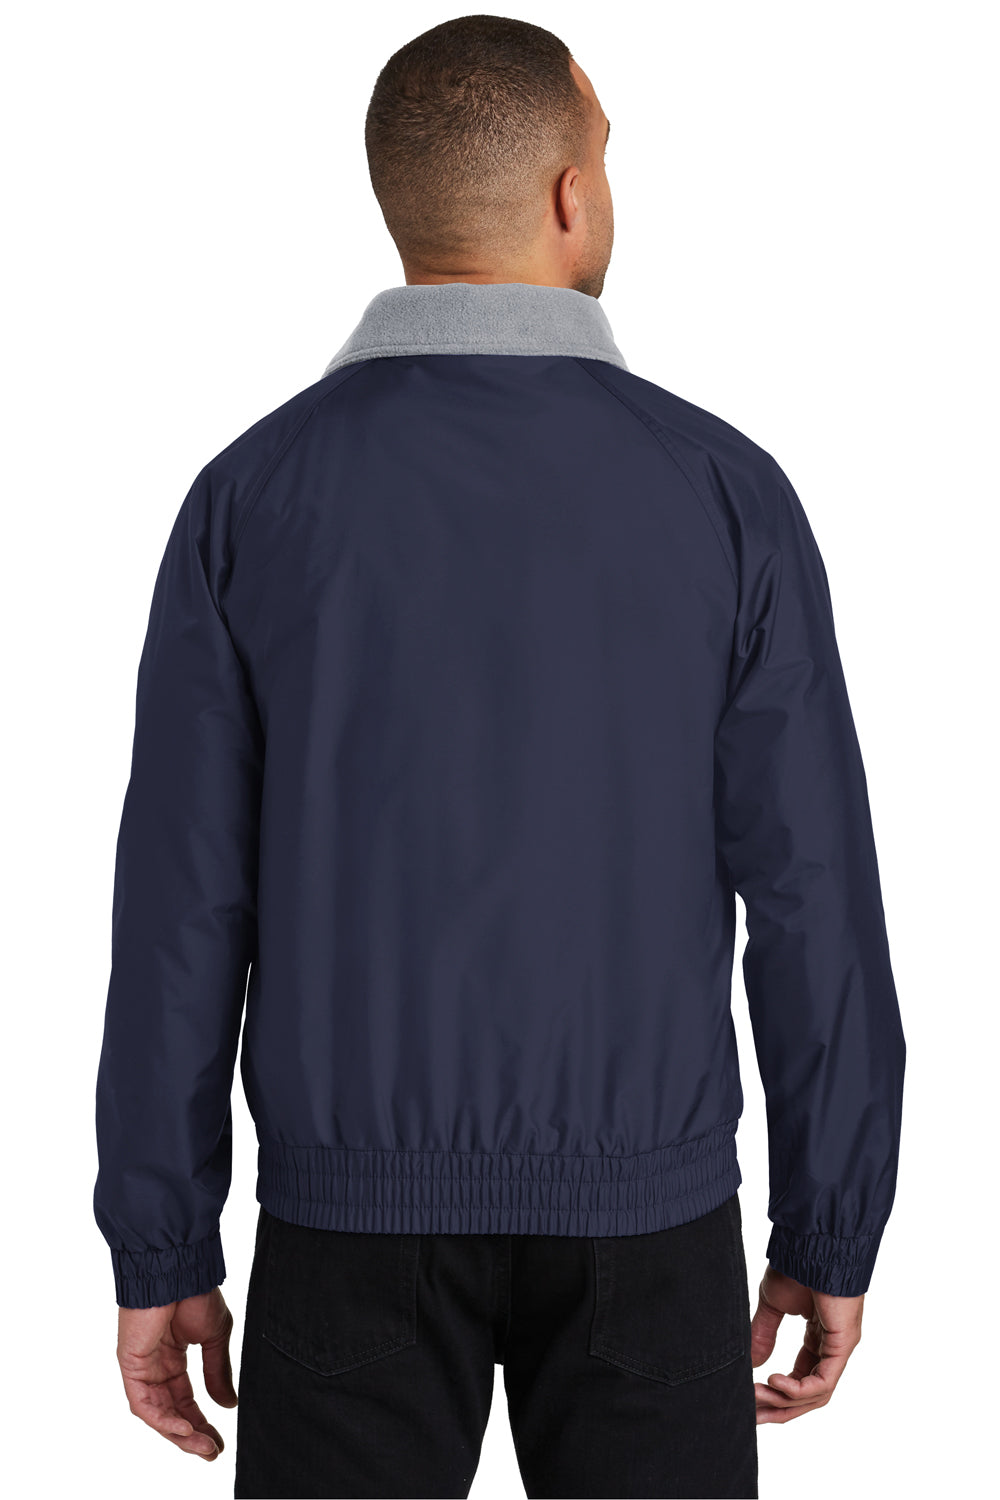 Port Authority JP54 Mens Competitor Wind & Water Resistant Full Zip Jacket Navy Blue Back